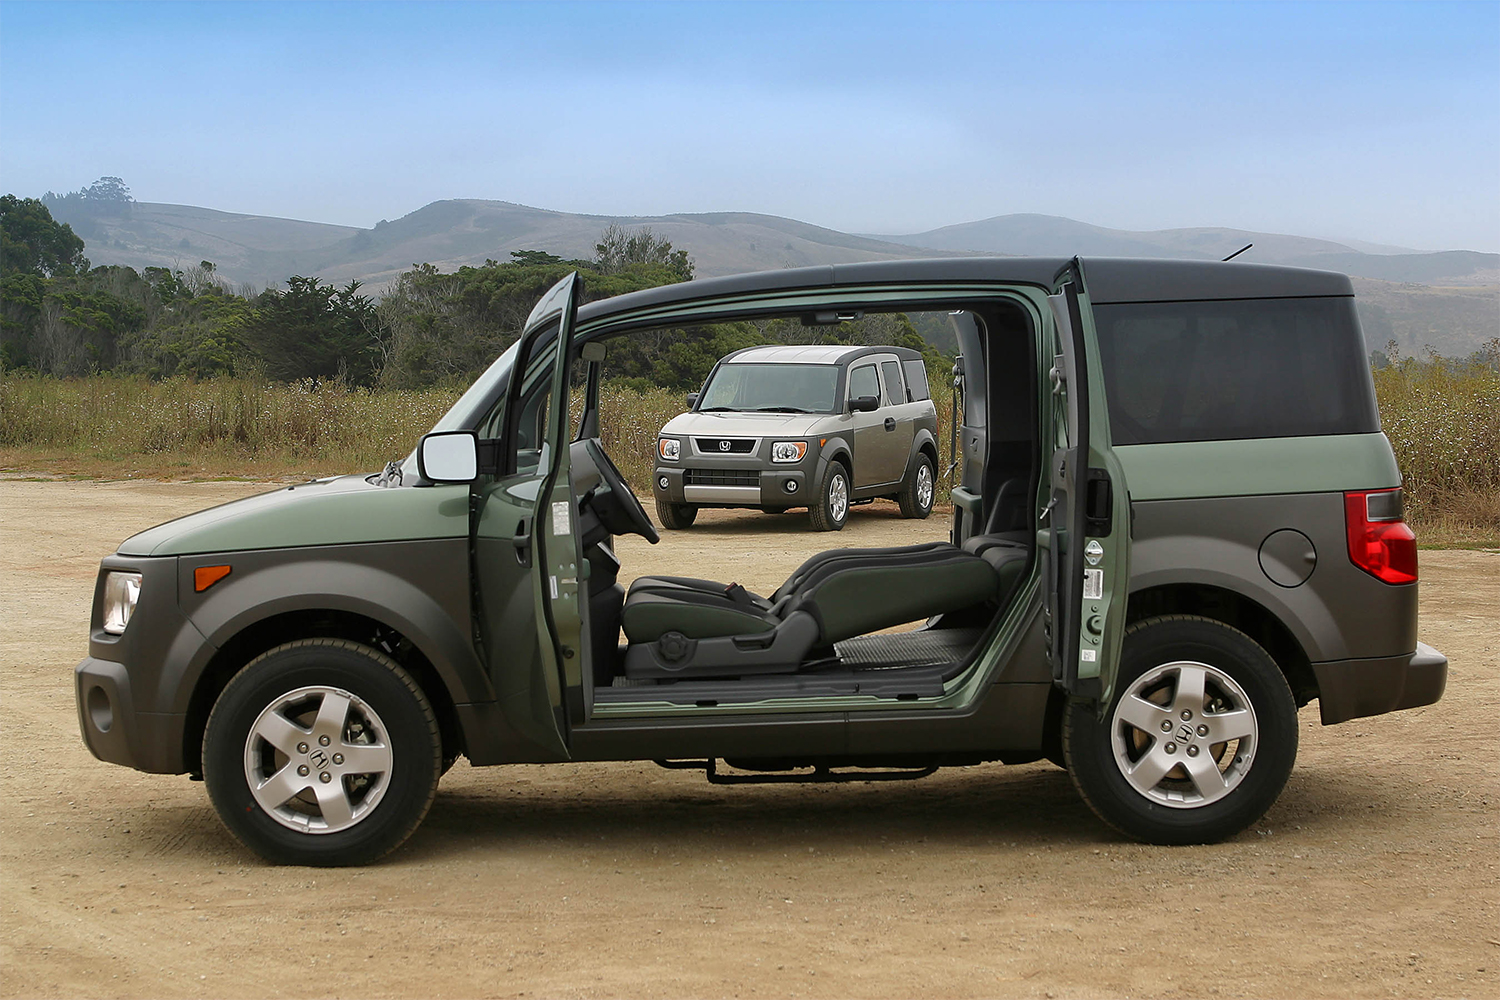 A Honda Element with the doors open showing folded down seats and another Element SUV in the background on the beach